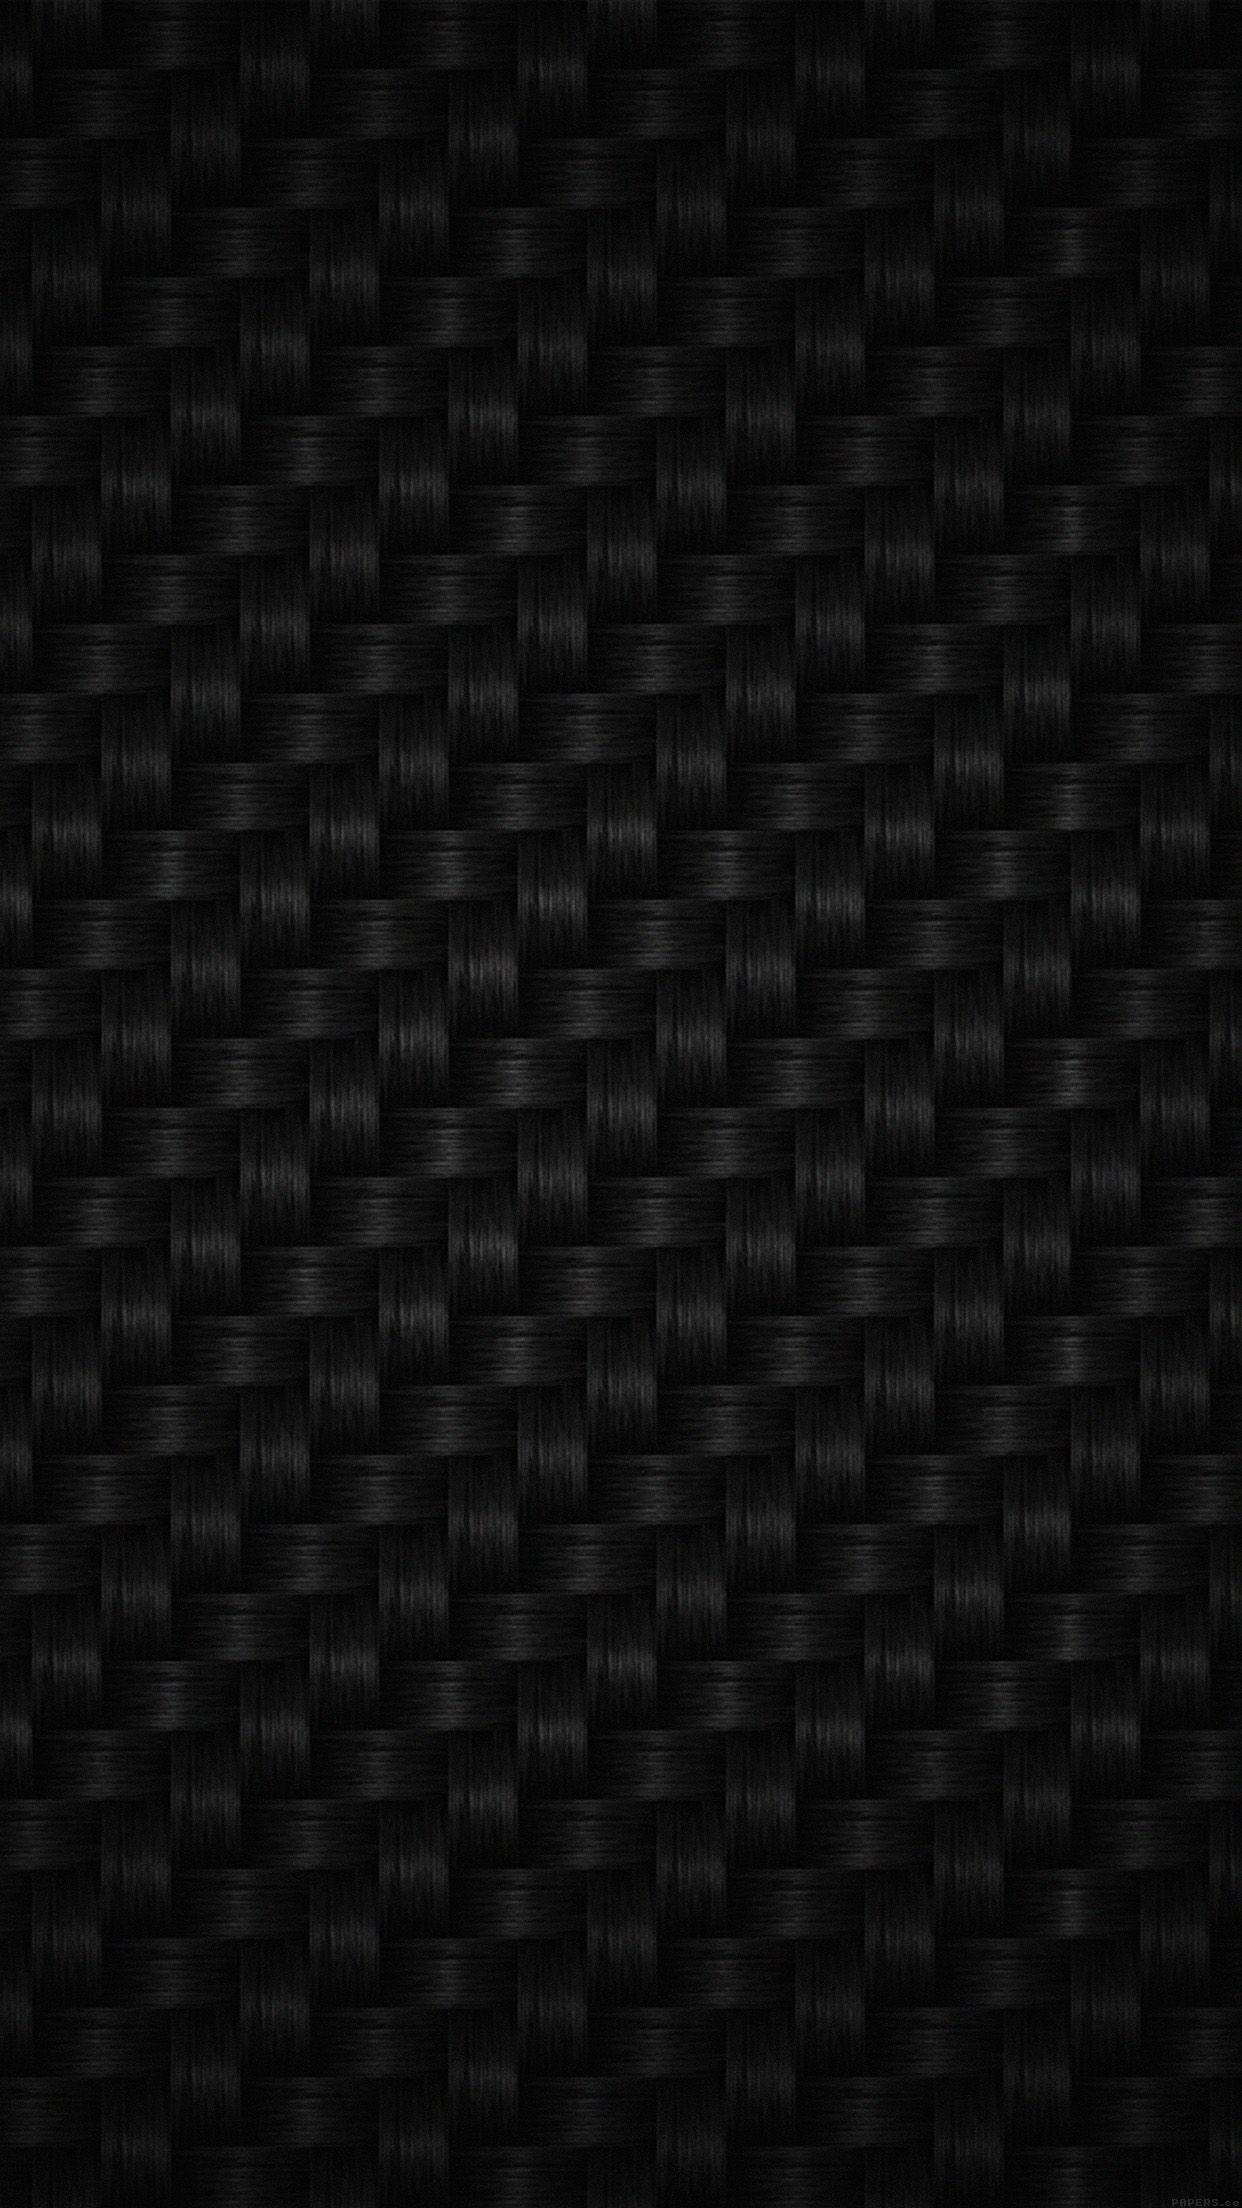 Black Theme Wallpaper Hd For Mobile : Easy system of downloading allows